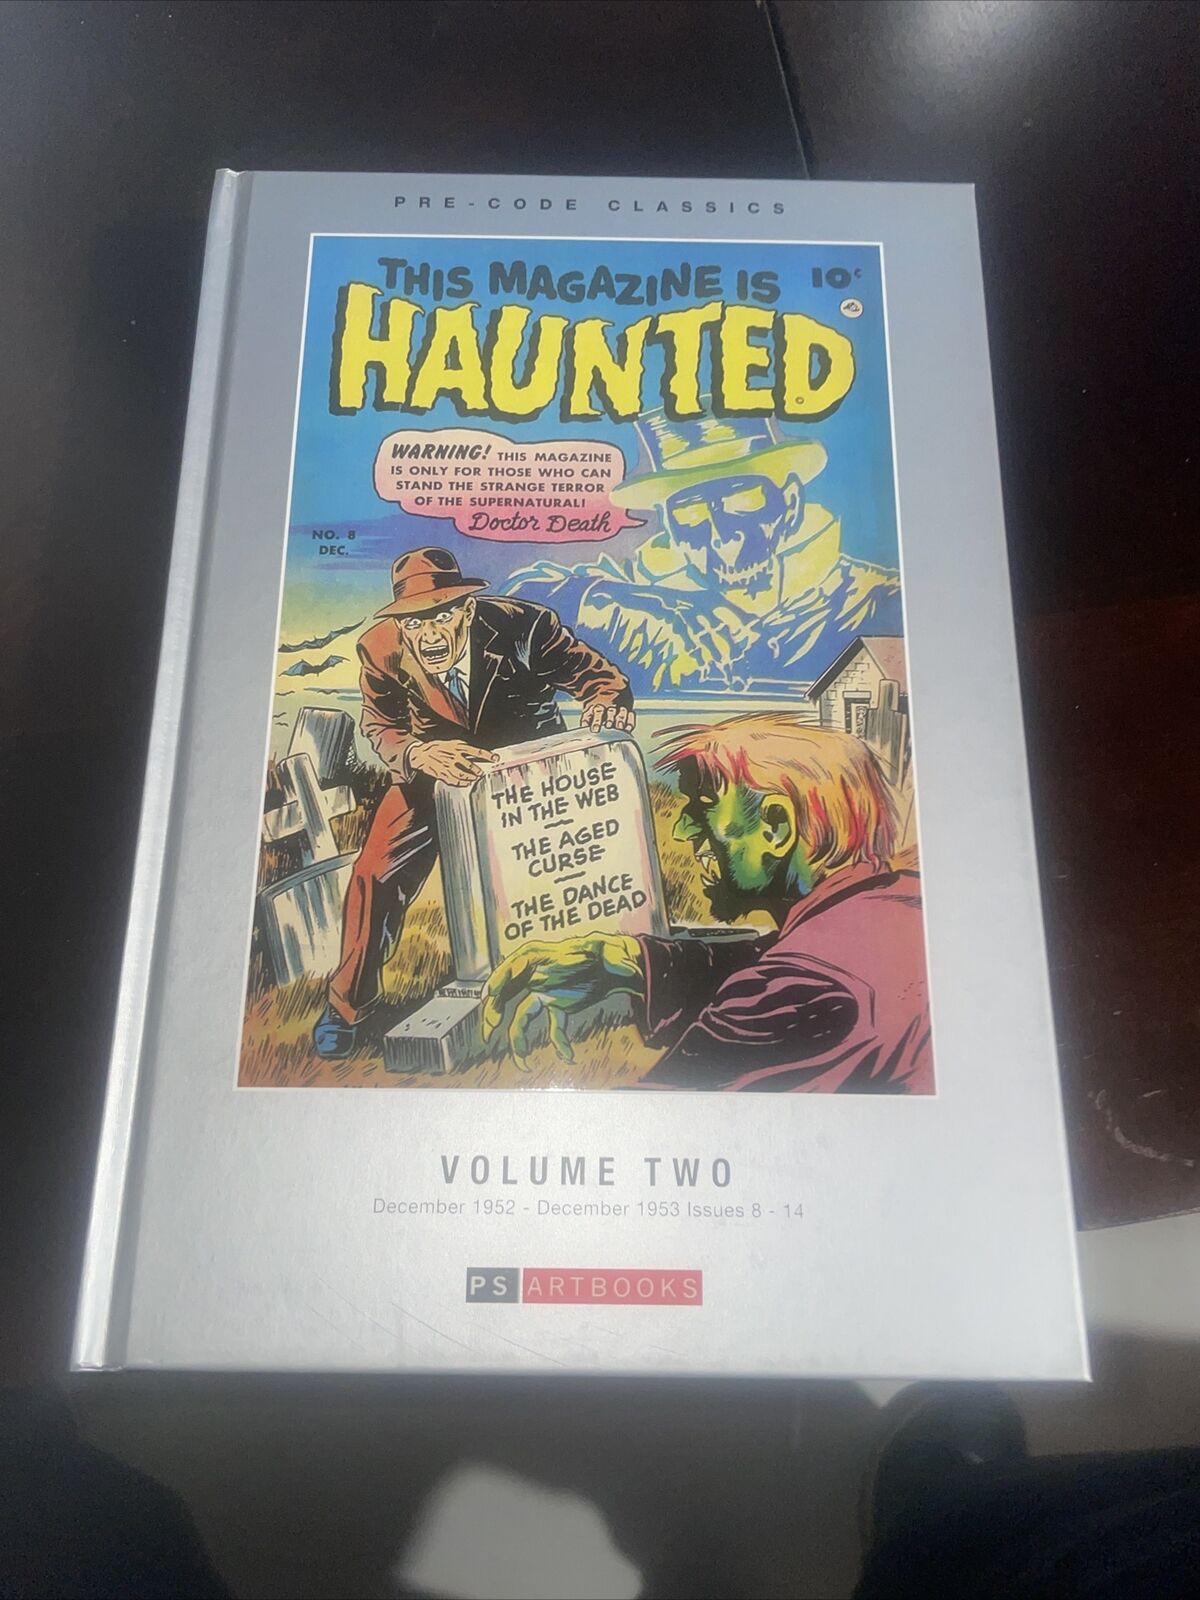 PRE CODE CLASSIC THIS MAGAZINE IS HAUNTED HC VOL 02 By Various - Hardcover